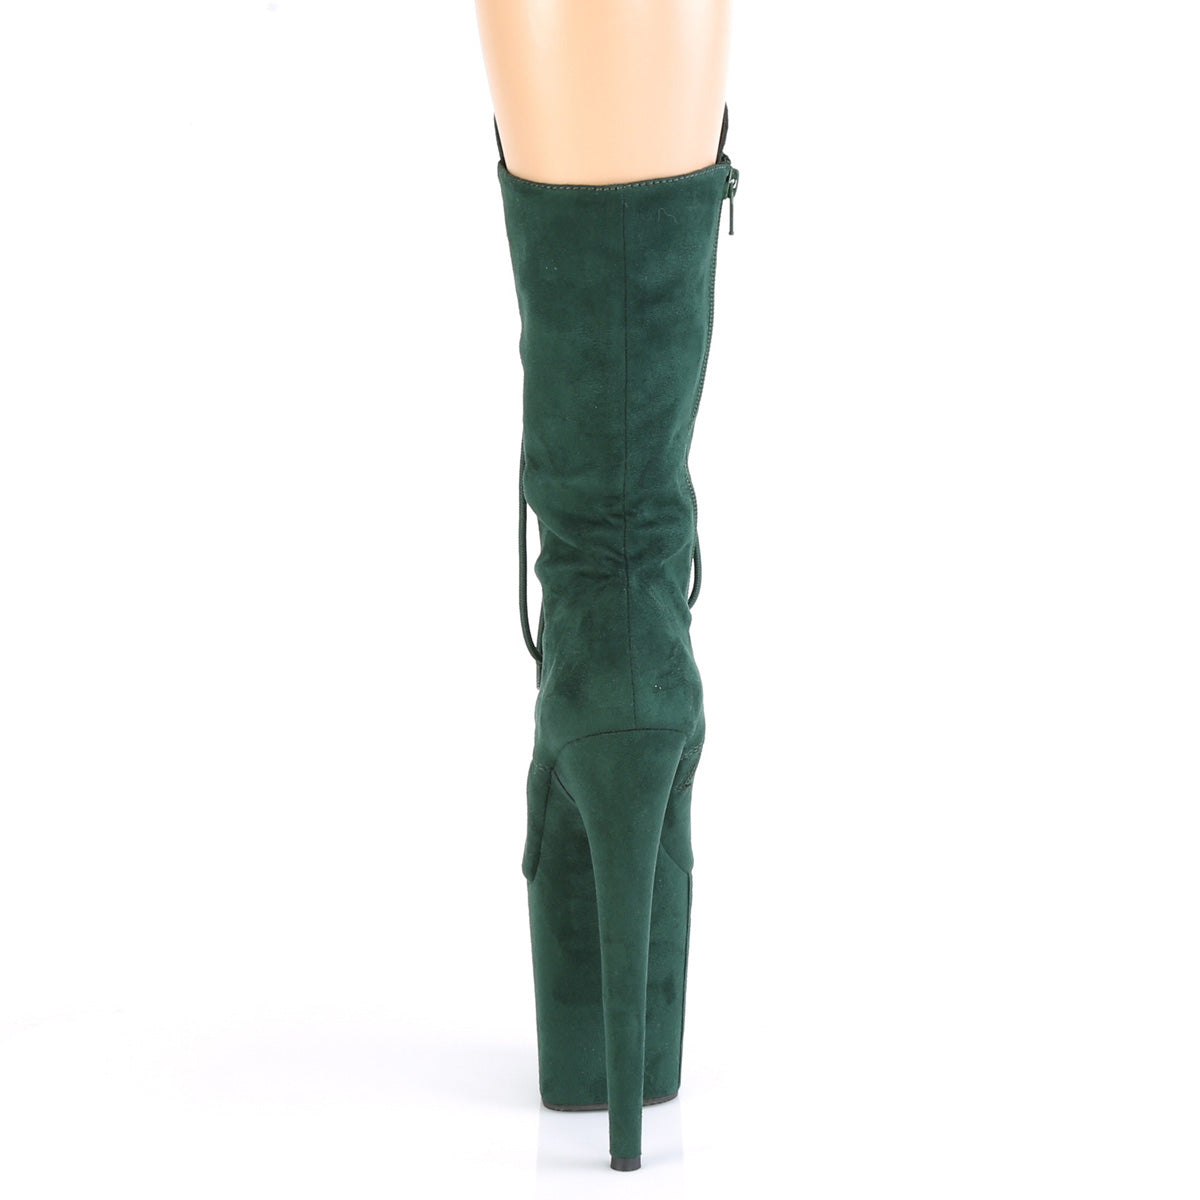 FLAMINGO-1050FS Pleaser Emerald Green F.Suede/Emerald Green F.Suede Platform Shoes [Pole Dancing Ankle Boots]